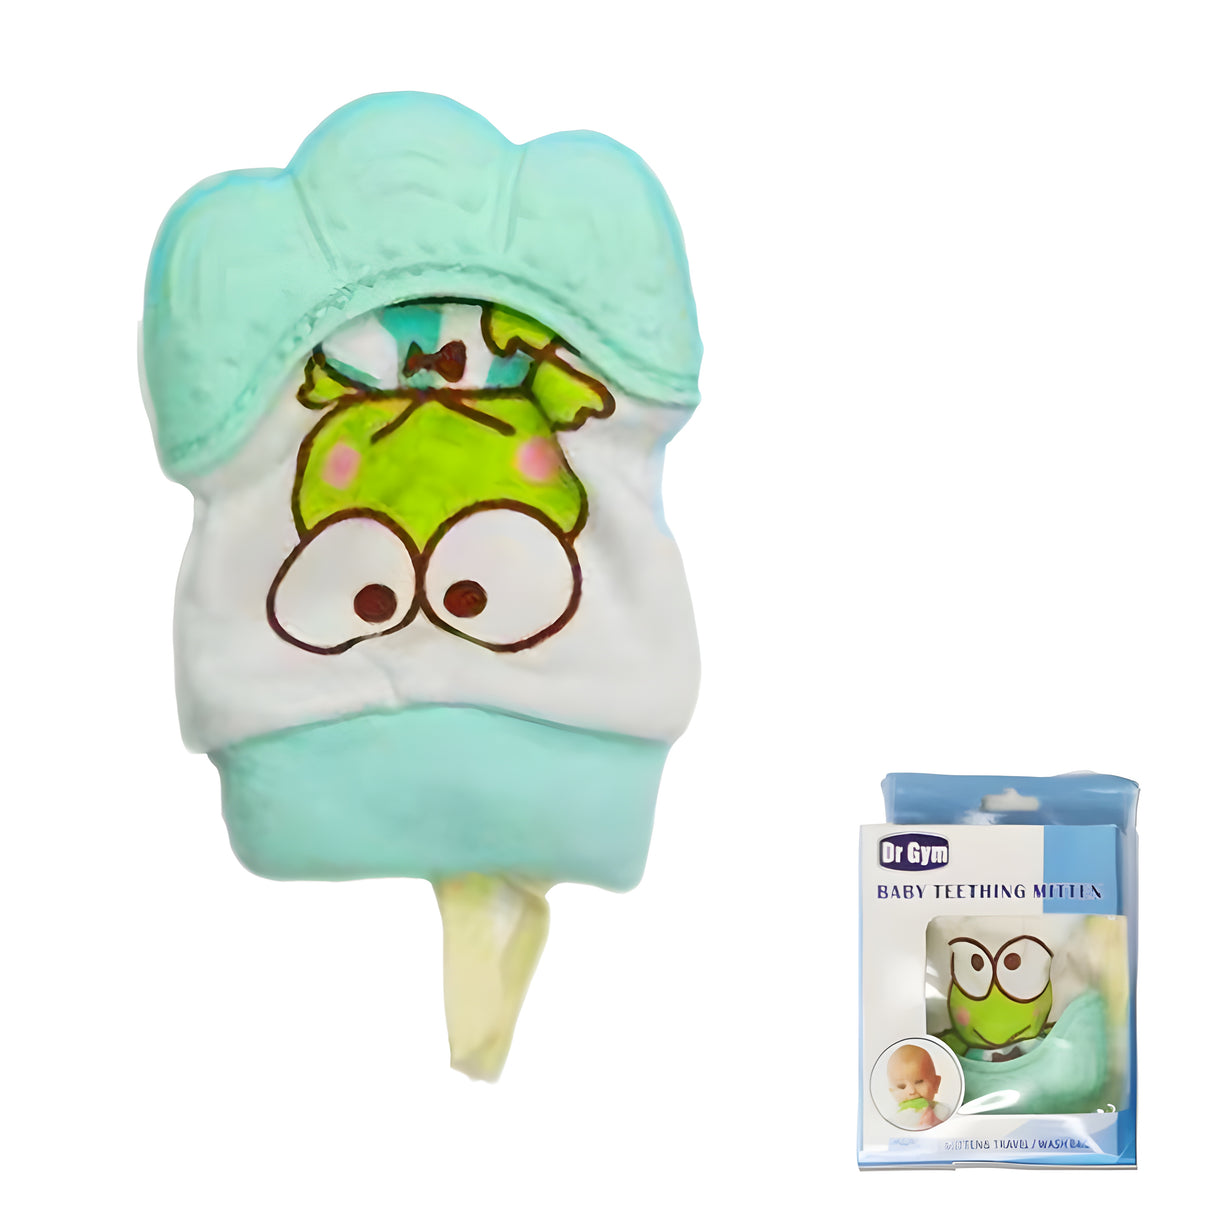 Animal Face Chewable Silicon Teething Mitten